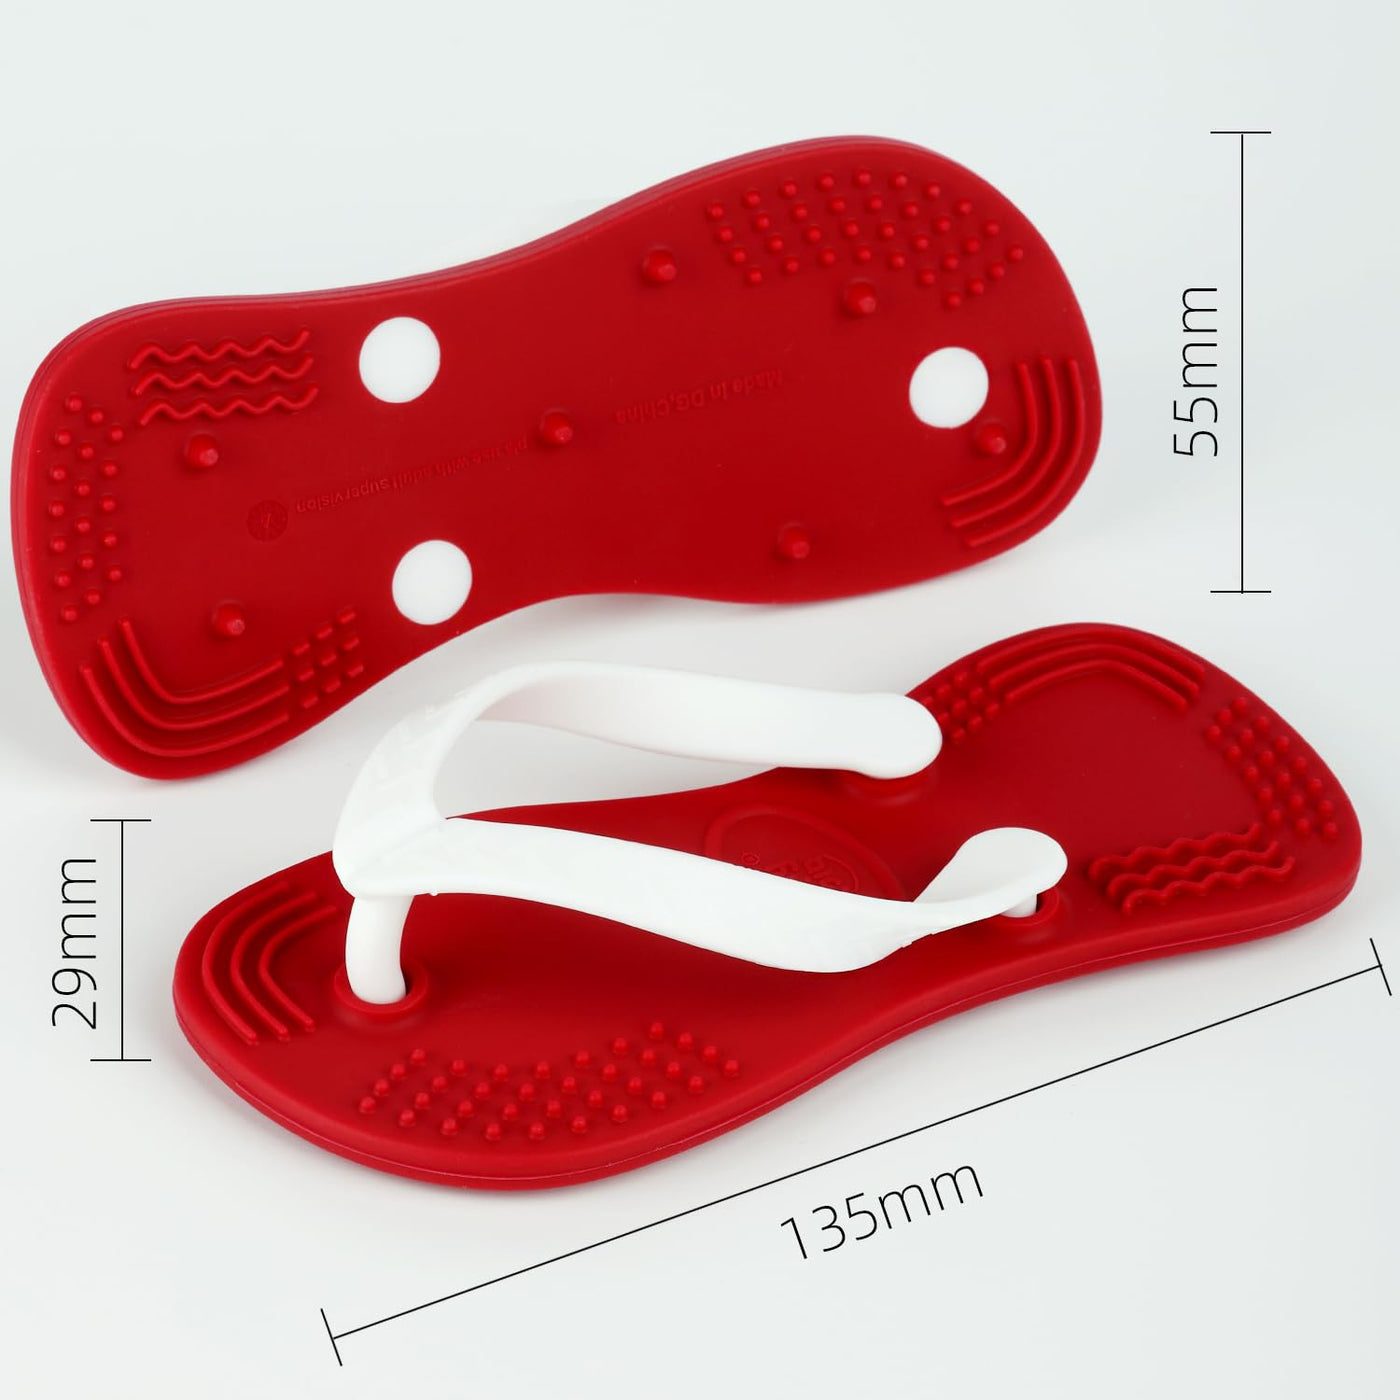 Flip-Flop Shaped Baby Teether Toys for 3M+ Teether for Teething Relief